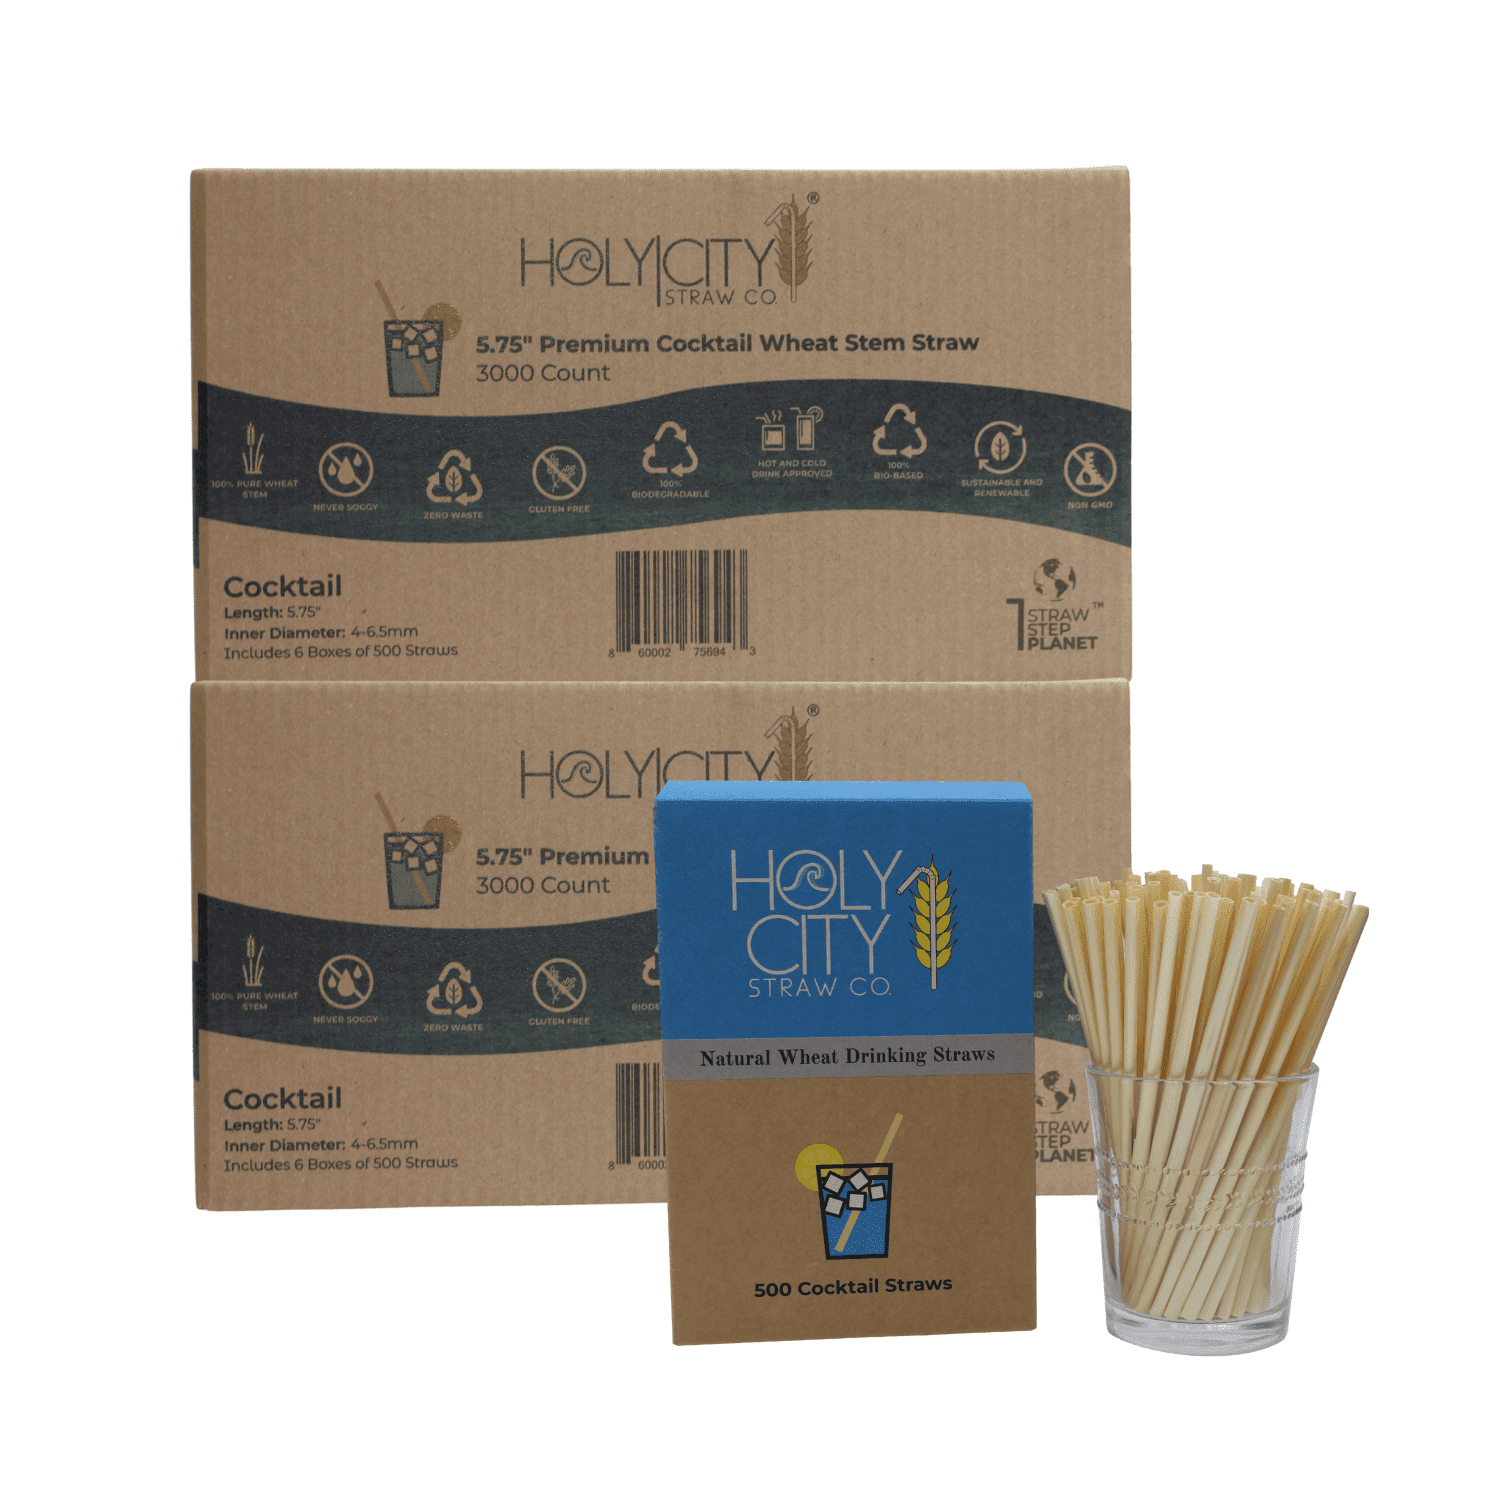 6000 count double case containing 12 boxes of 500 count boxes of Holy City Cocktail Wheat Straws